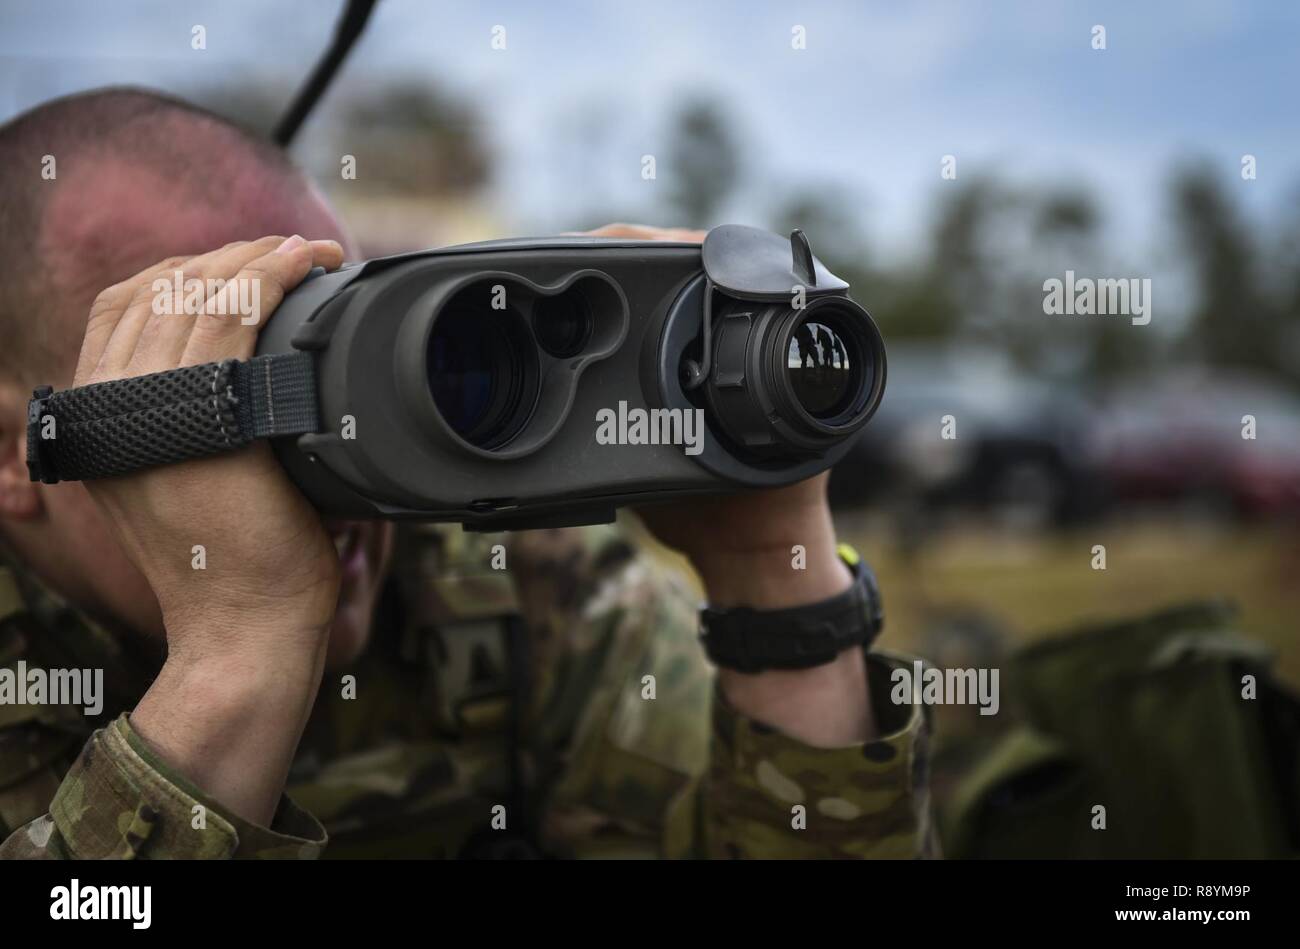 A Soldier with the 1st Battalion, 10th Special Forces Group, uses a laser rangefinder at the Eglin Range, Eglin Air Force Base, Fla., March 17, 2017. Soldiers use the laser rangefinder to identify target location distance, day or night, and with limited visibility such as fog or smoke. Stock Photo